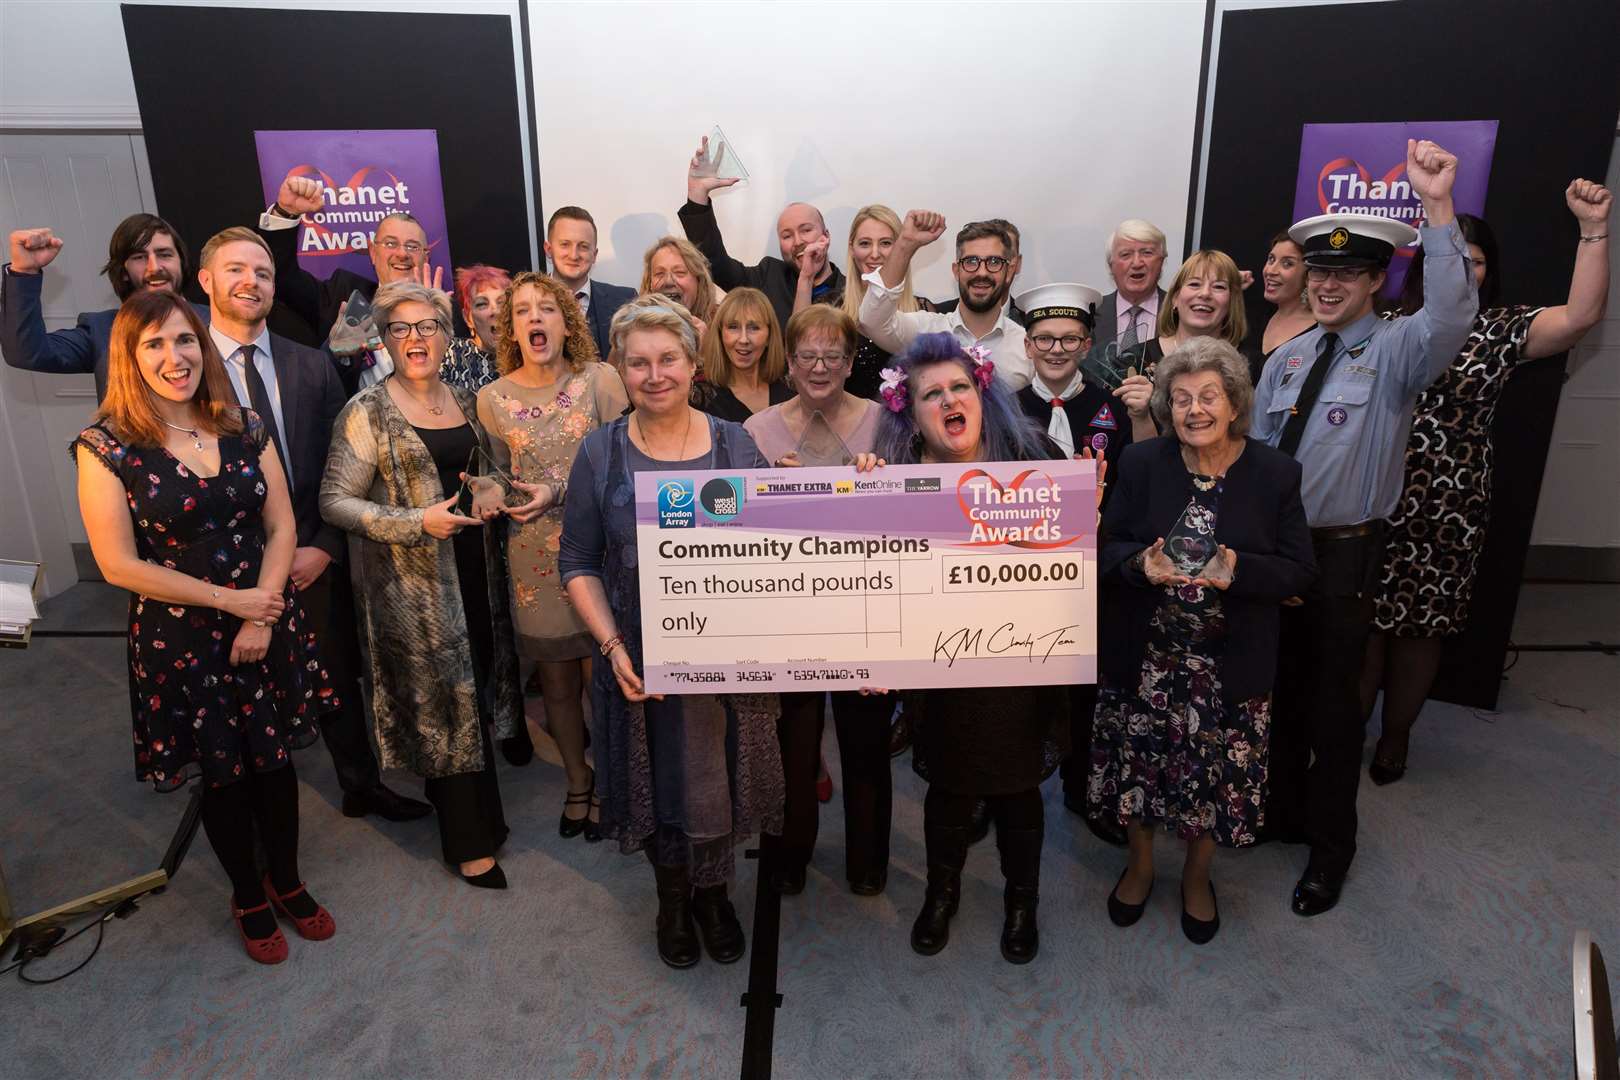 The Thanet Community Awards Champion charities and volunteers